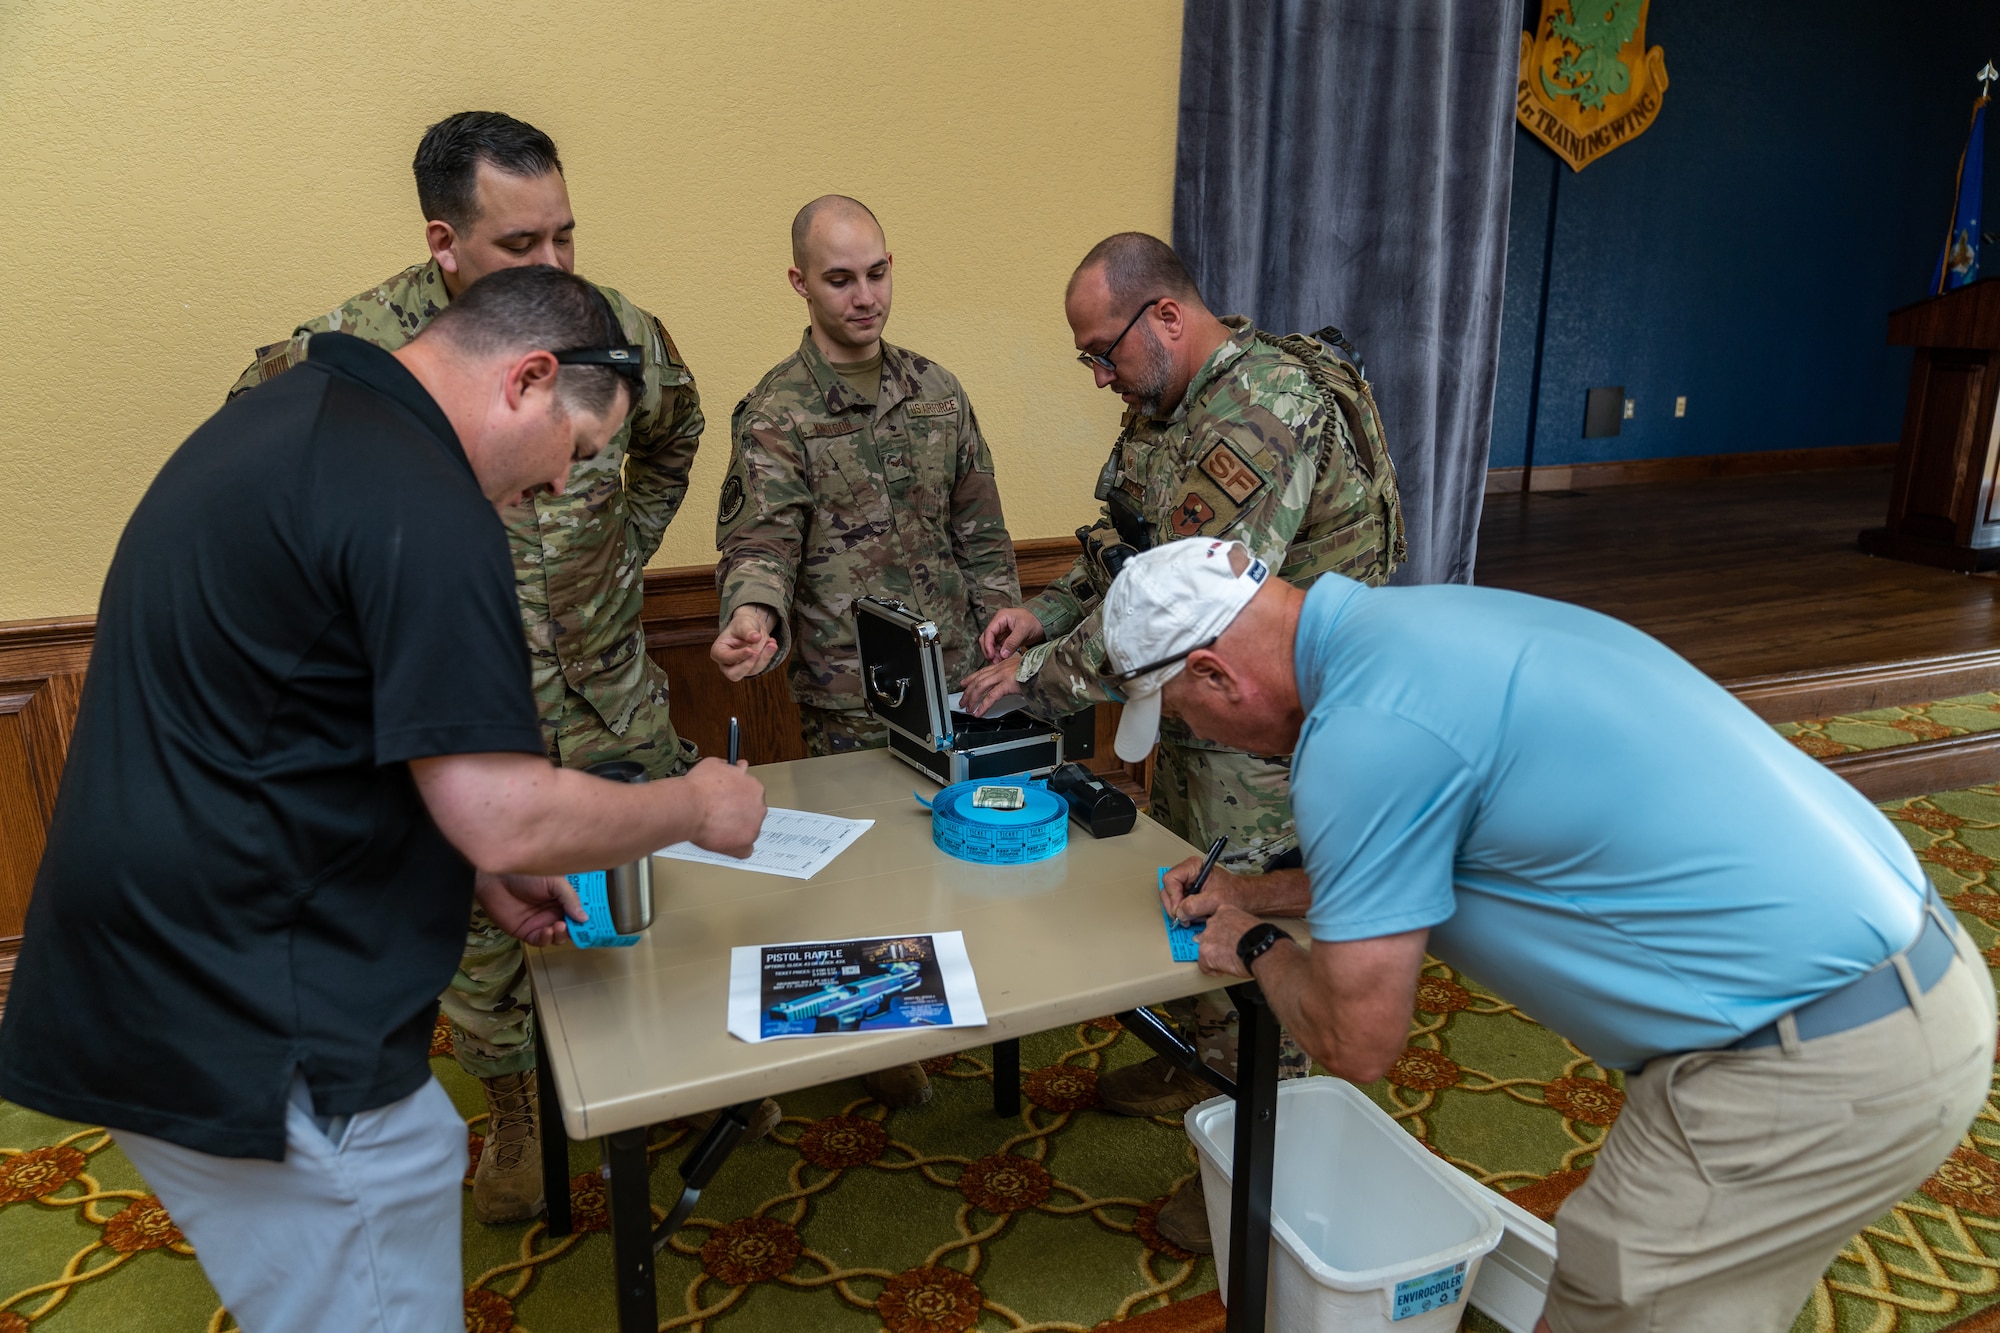 Members from the 81st Security Forces Squadron sign in police officers to play a round of golf before the opening ceremony for National Police Week at Keesler Air Force Base, Mississippi, May 15, 2023.